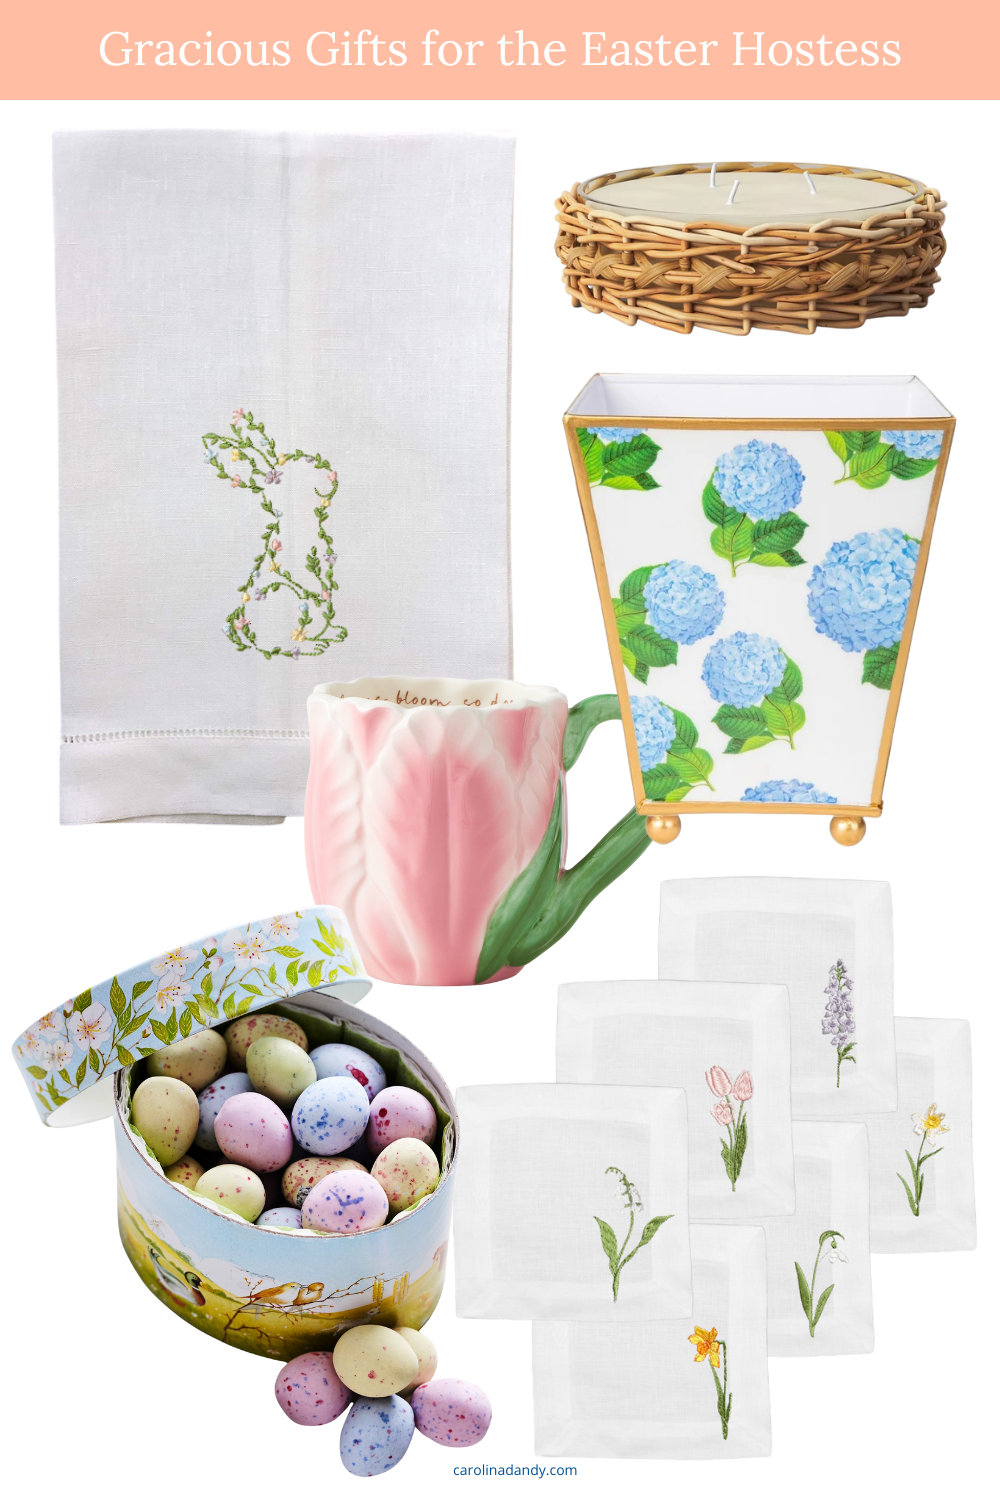 Gracious Gift Ideas for the Easter Hostess